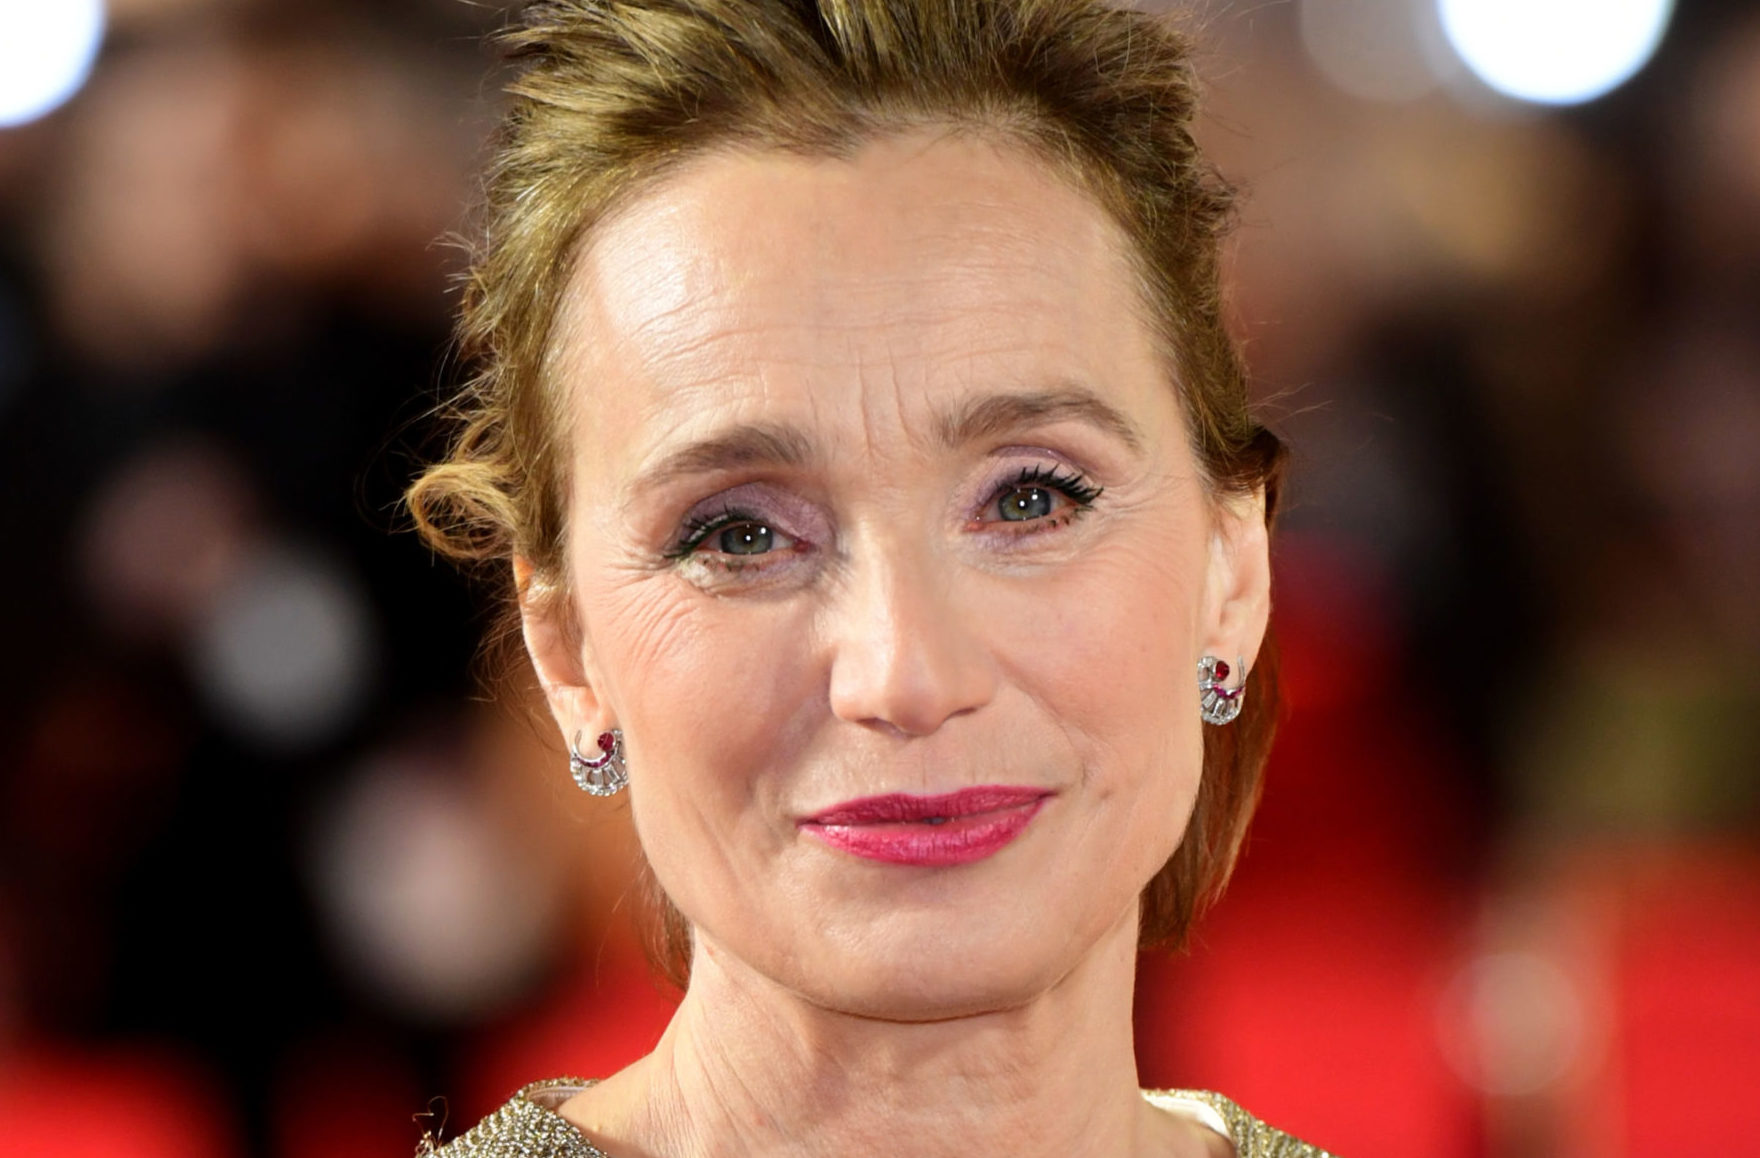 Kristin Scott Thomas is coming out fighting for older women